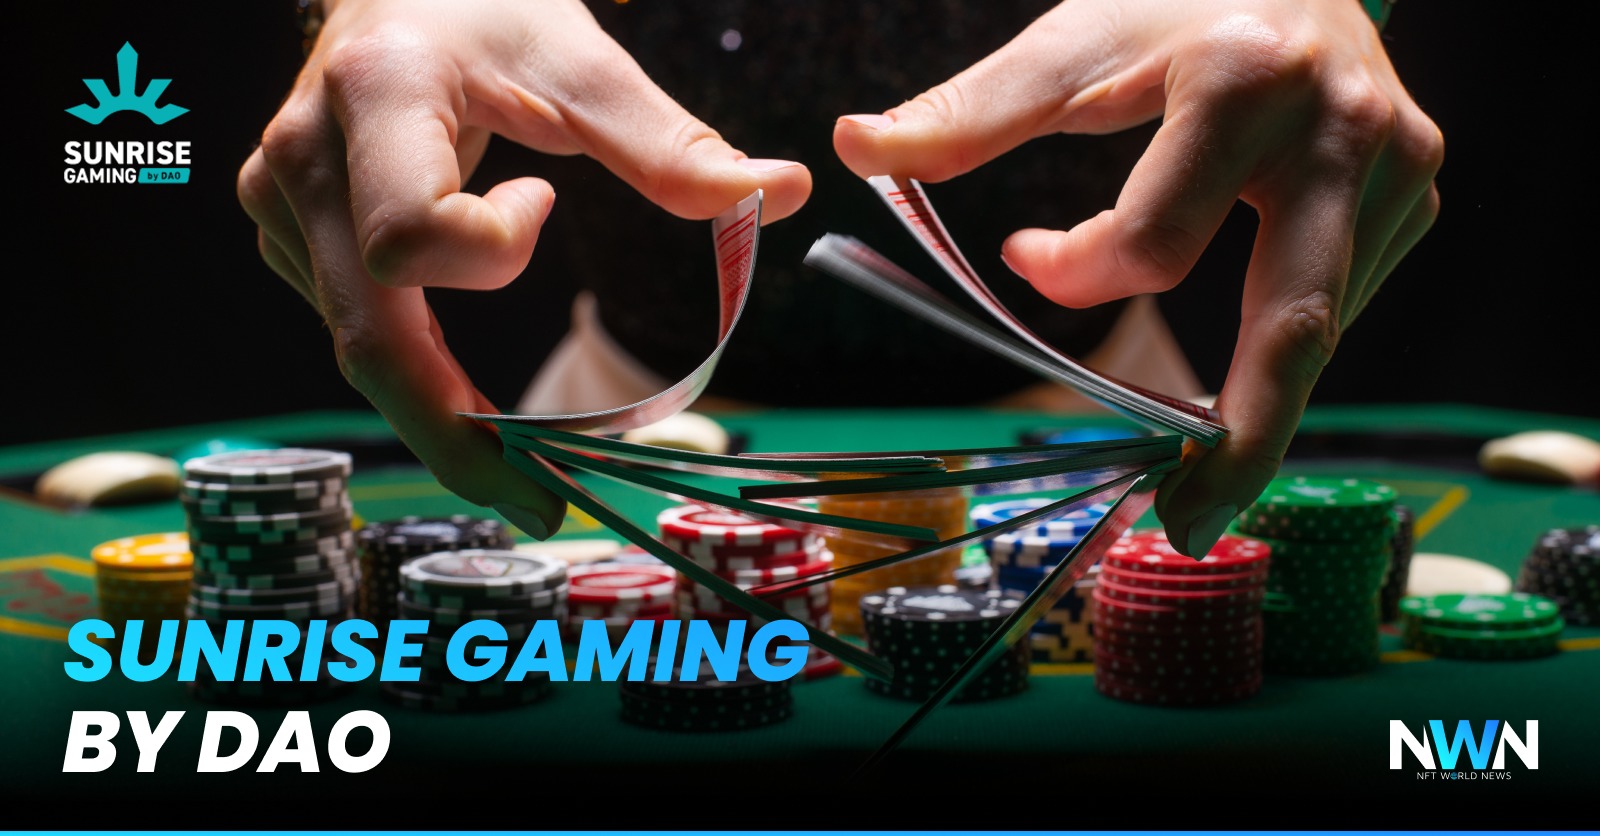 Sunrise Gaming By DAO is Dedicated to Make Casino Games Decentralized